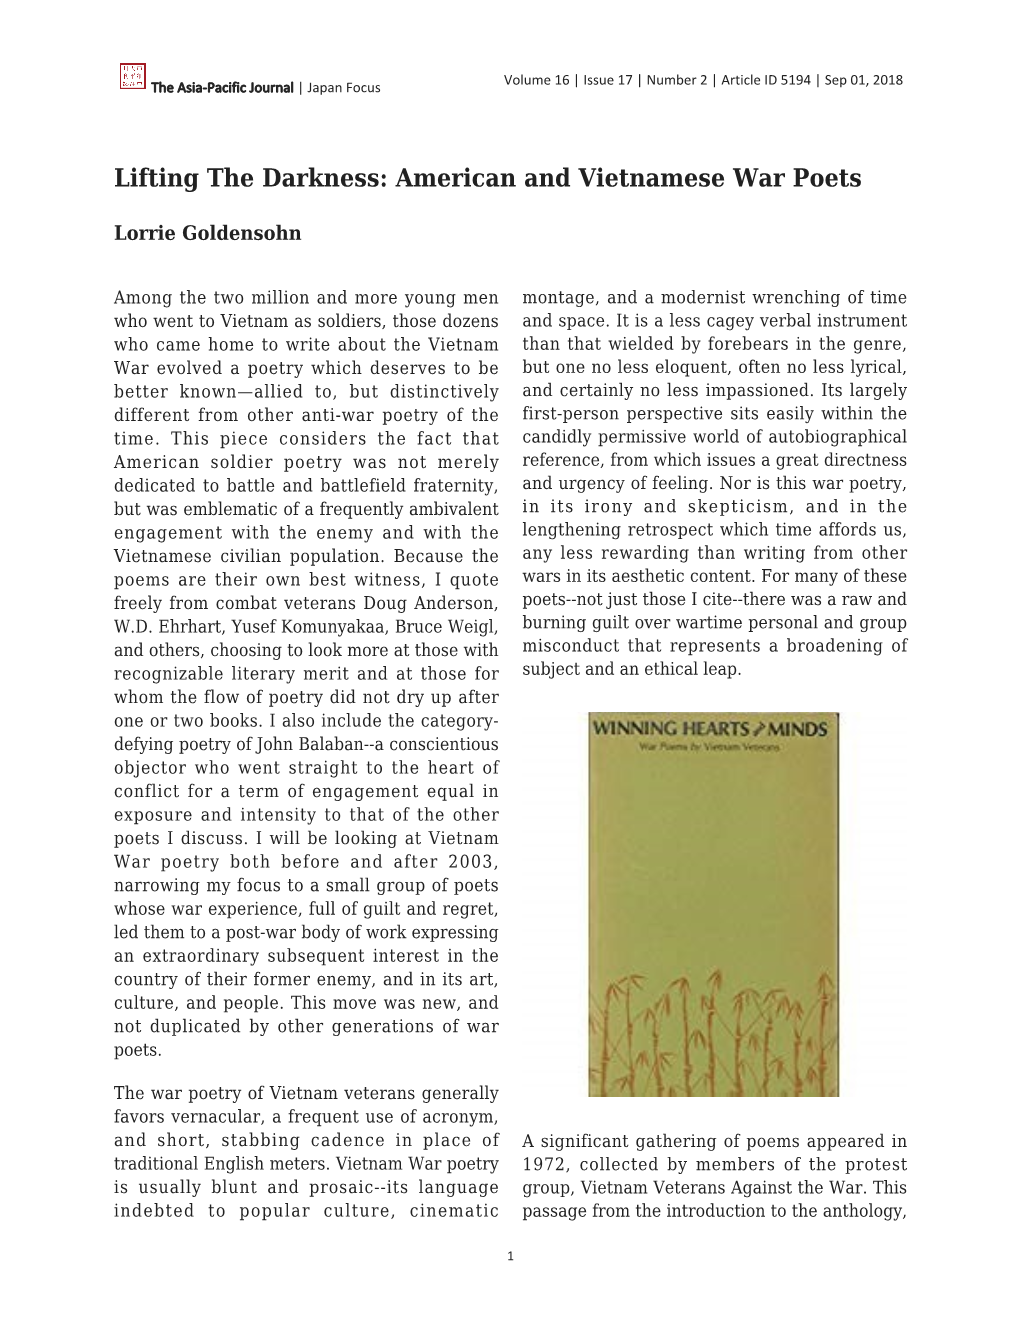 Lifting the Darkness: American and Vietnamese War Poets